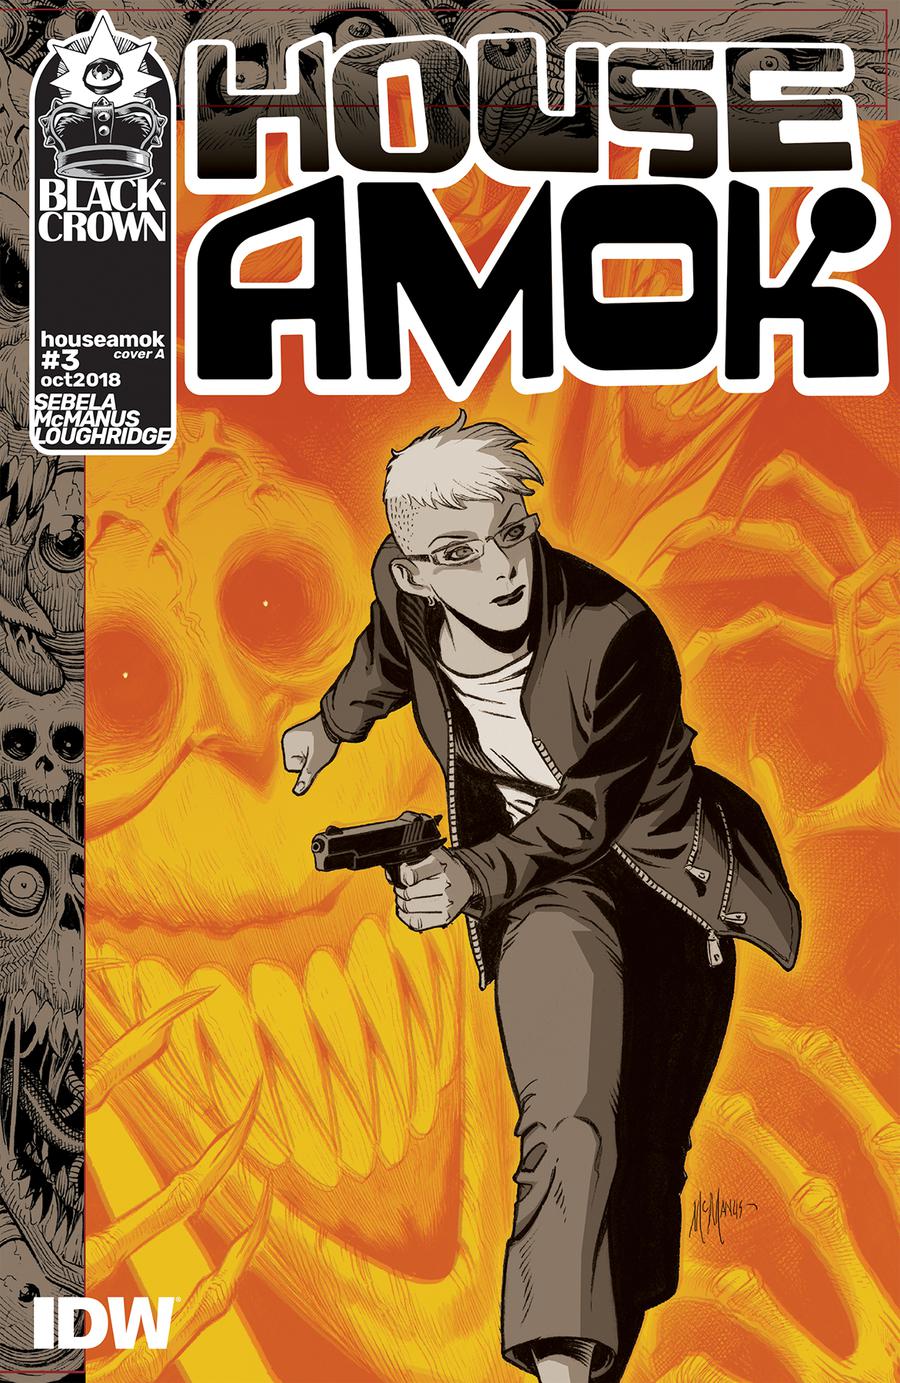 House Amok #3 Cover A Regular Shawn McManus Cover